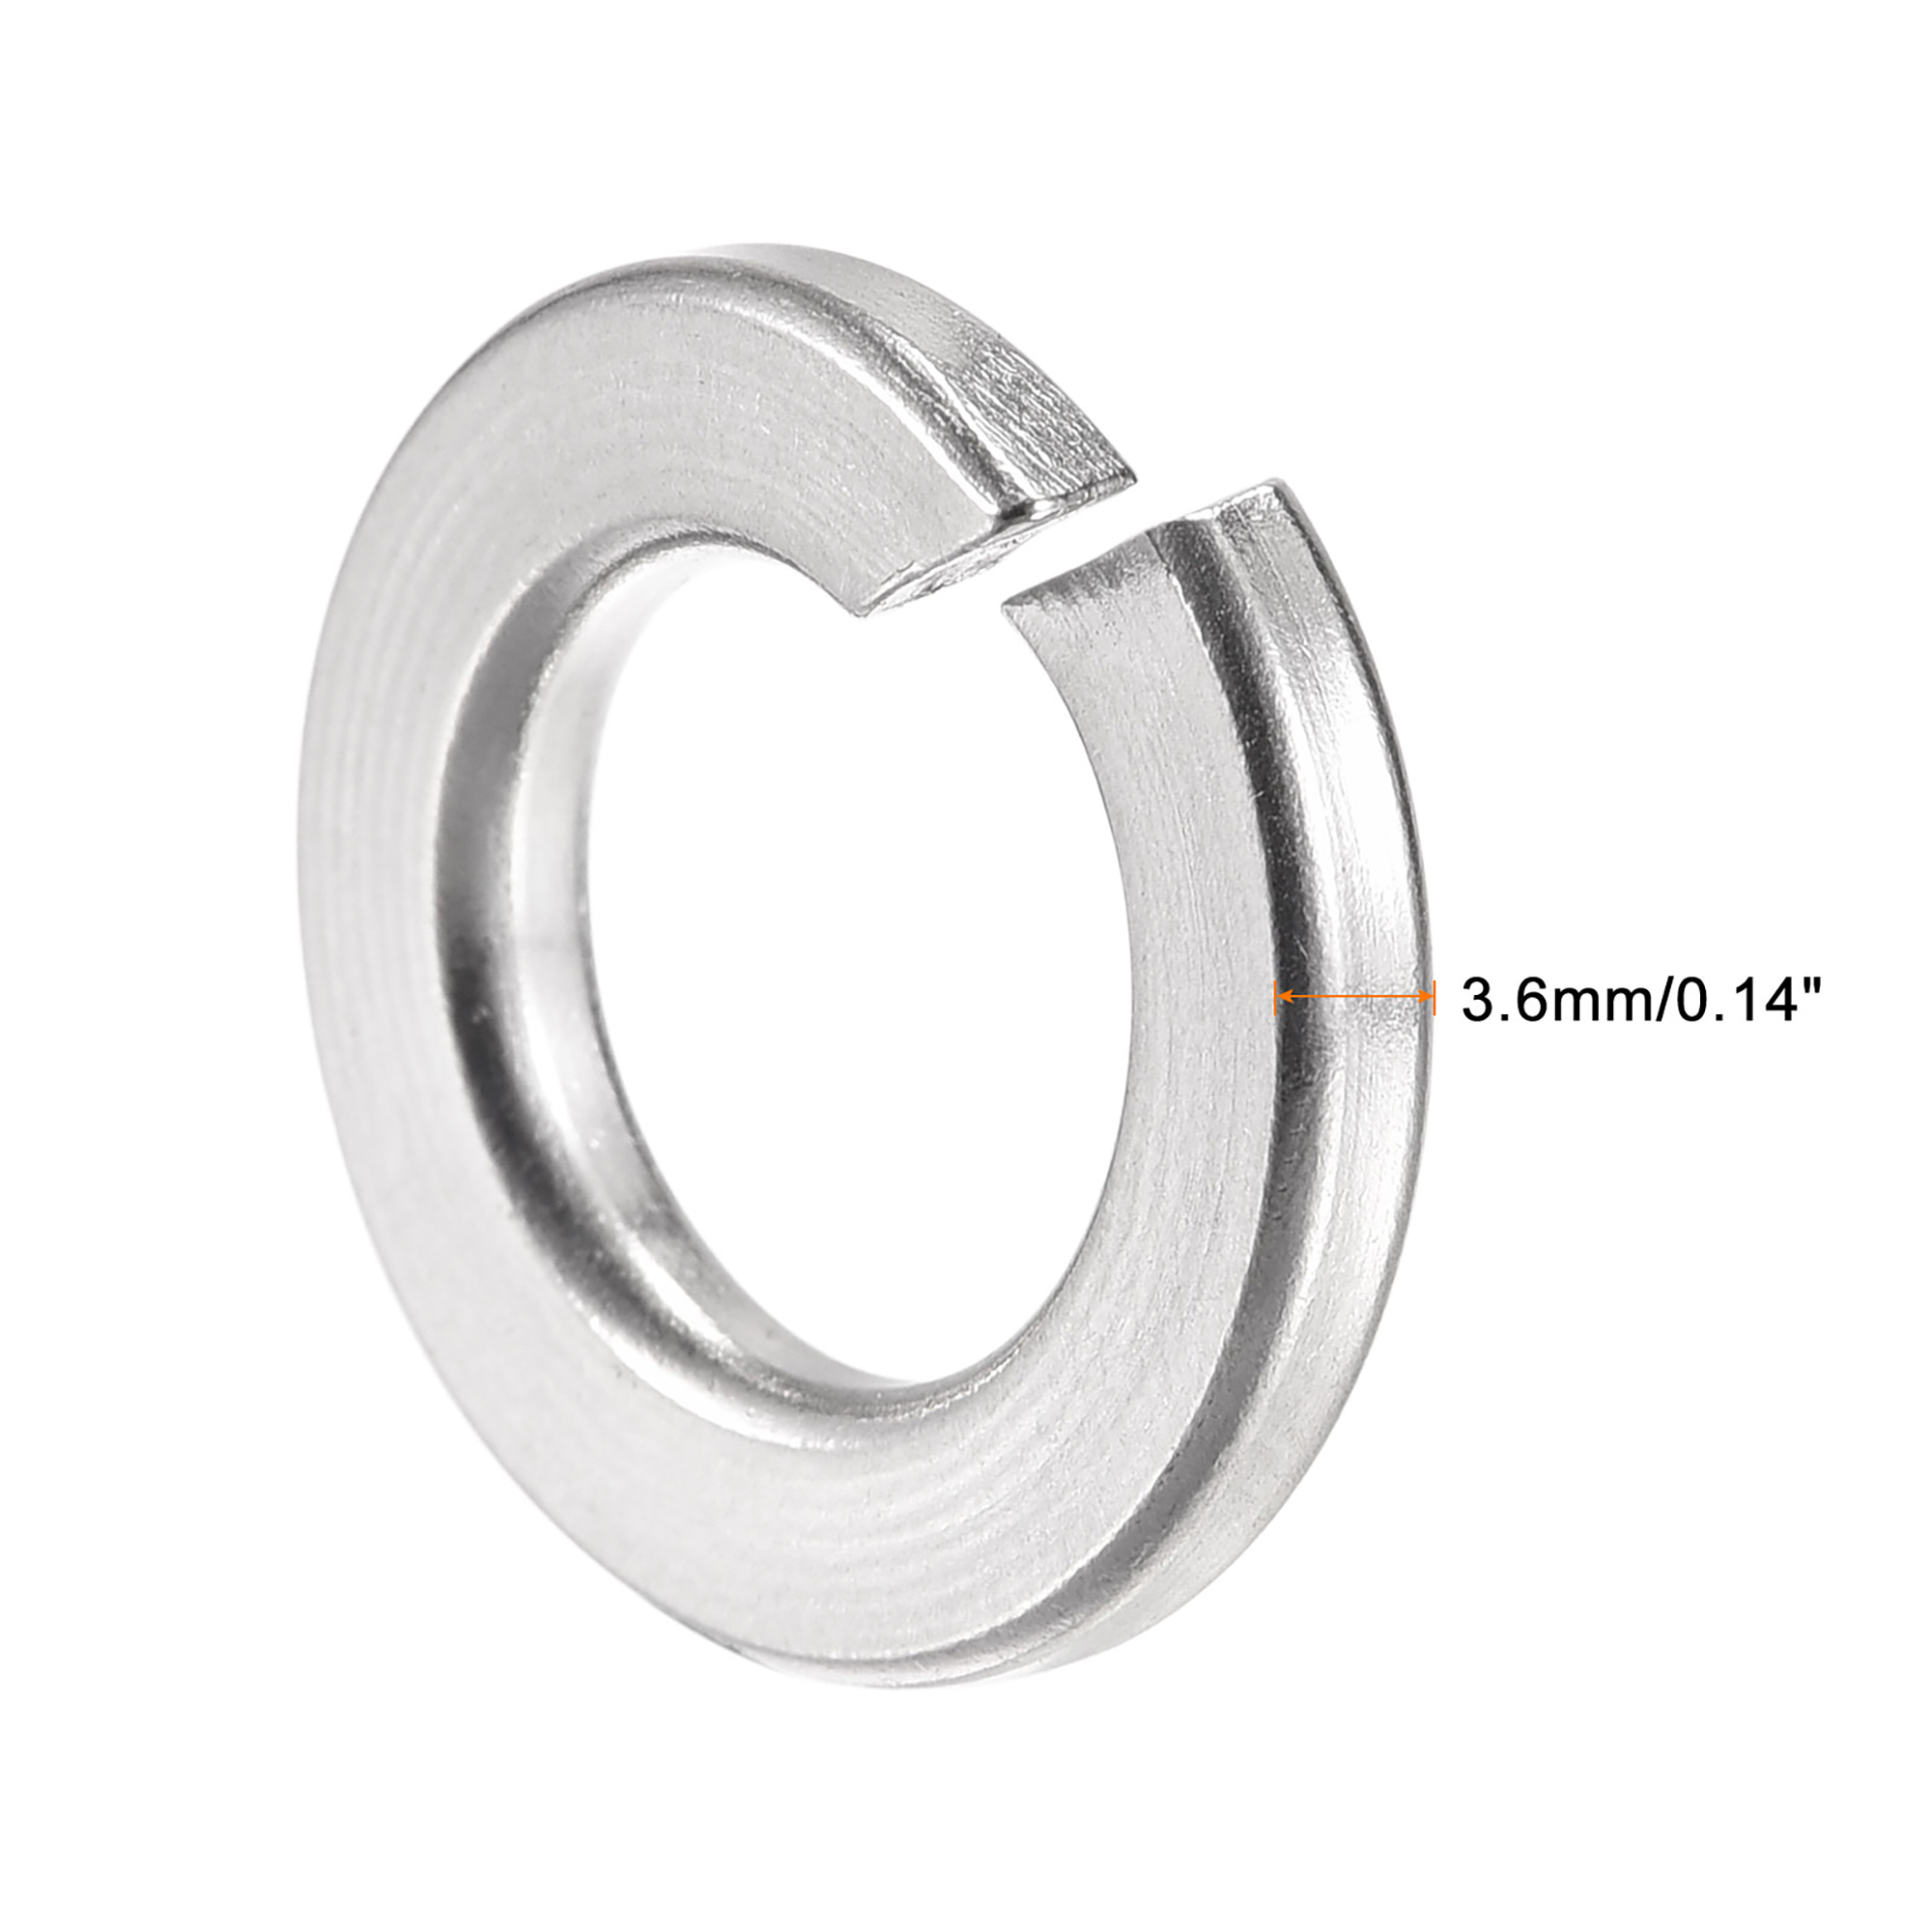 Uxcell 9/16-Inch 304 Stainless Steel Split Spring Lock Washer 25 Pack - image 3 of 5